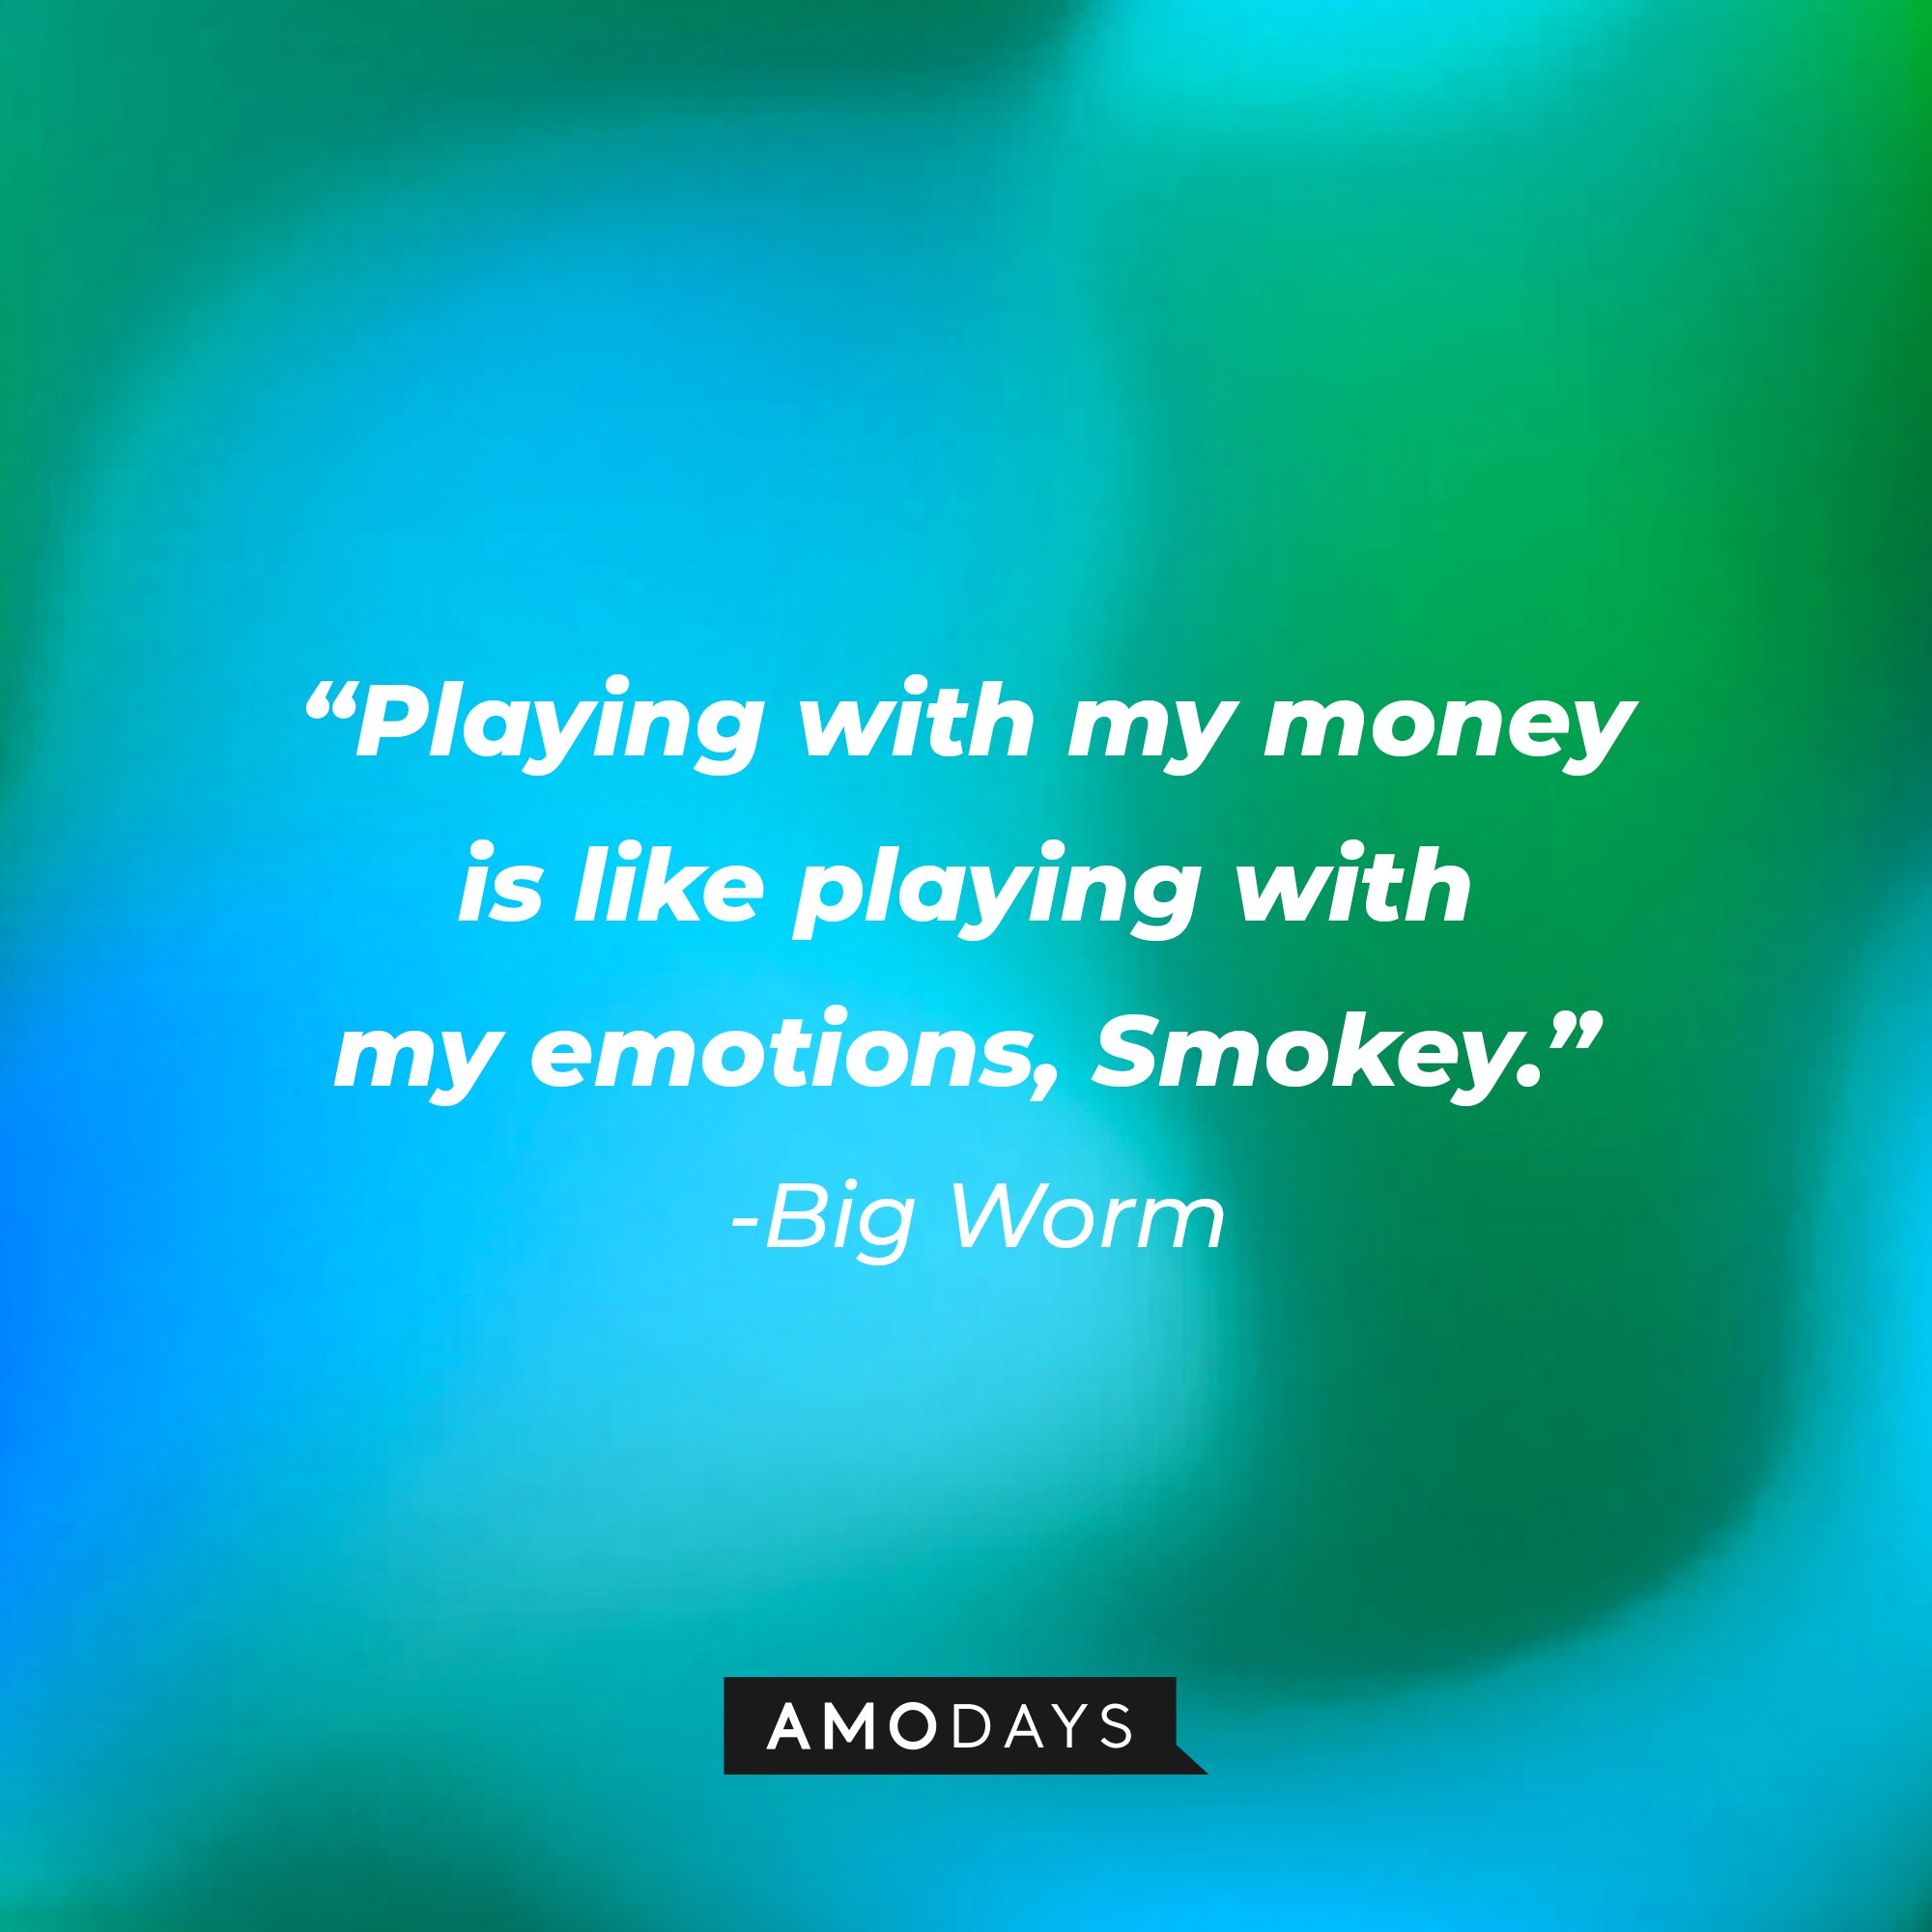 Big Worm’s quote: "Playing with my money is like playing with my emotions, Smokey." | Image: AmoDays